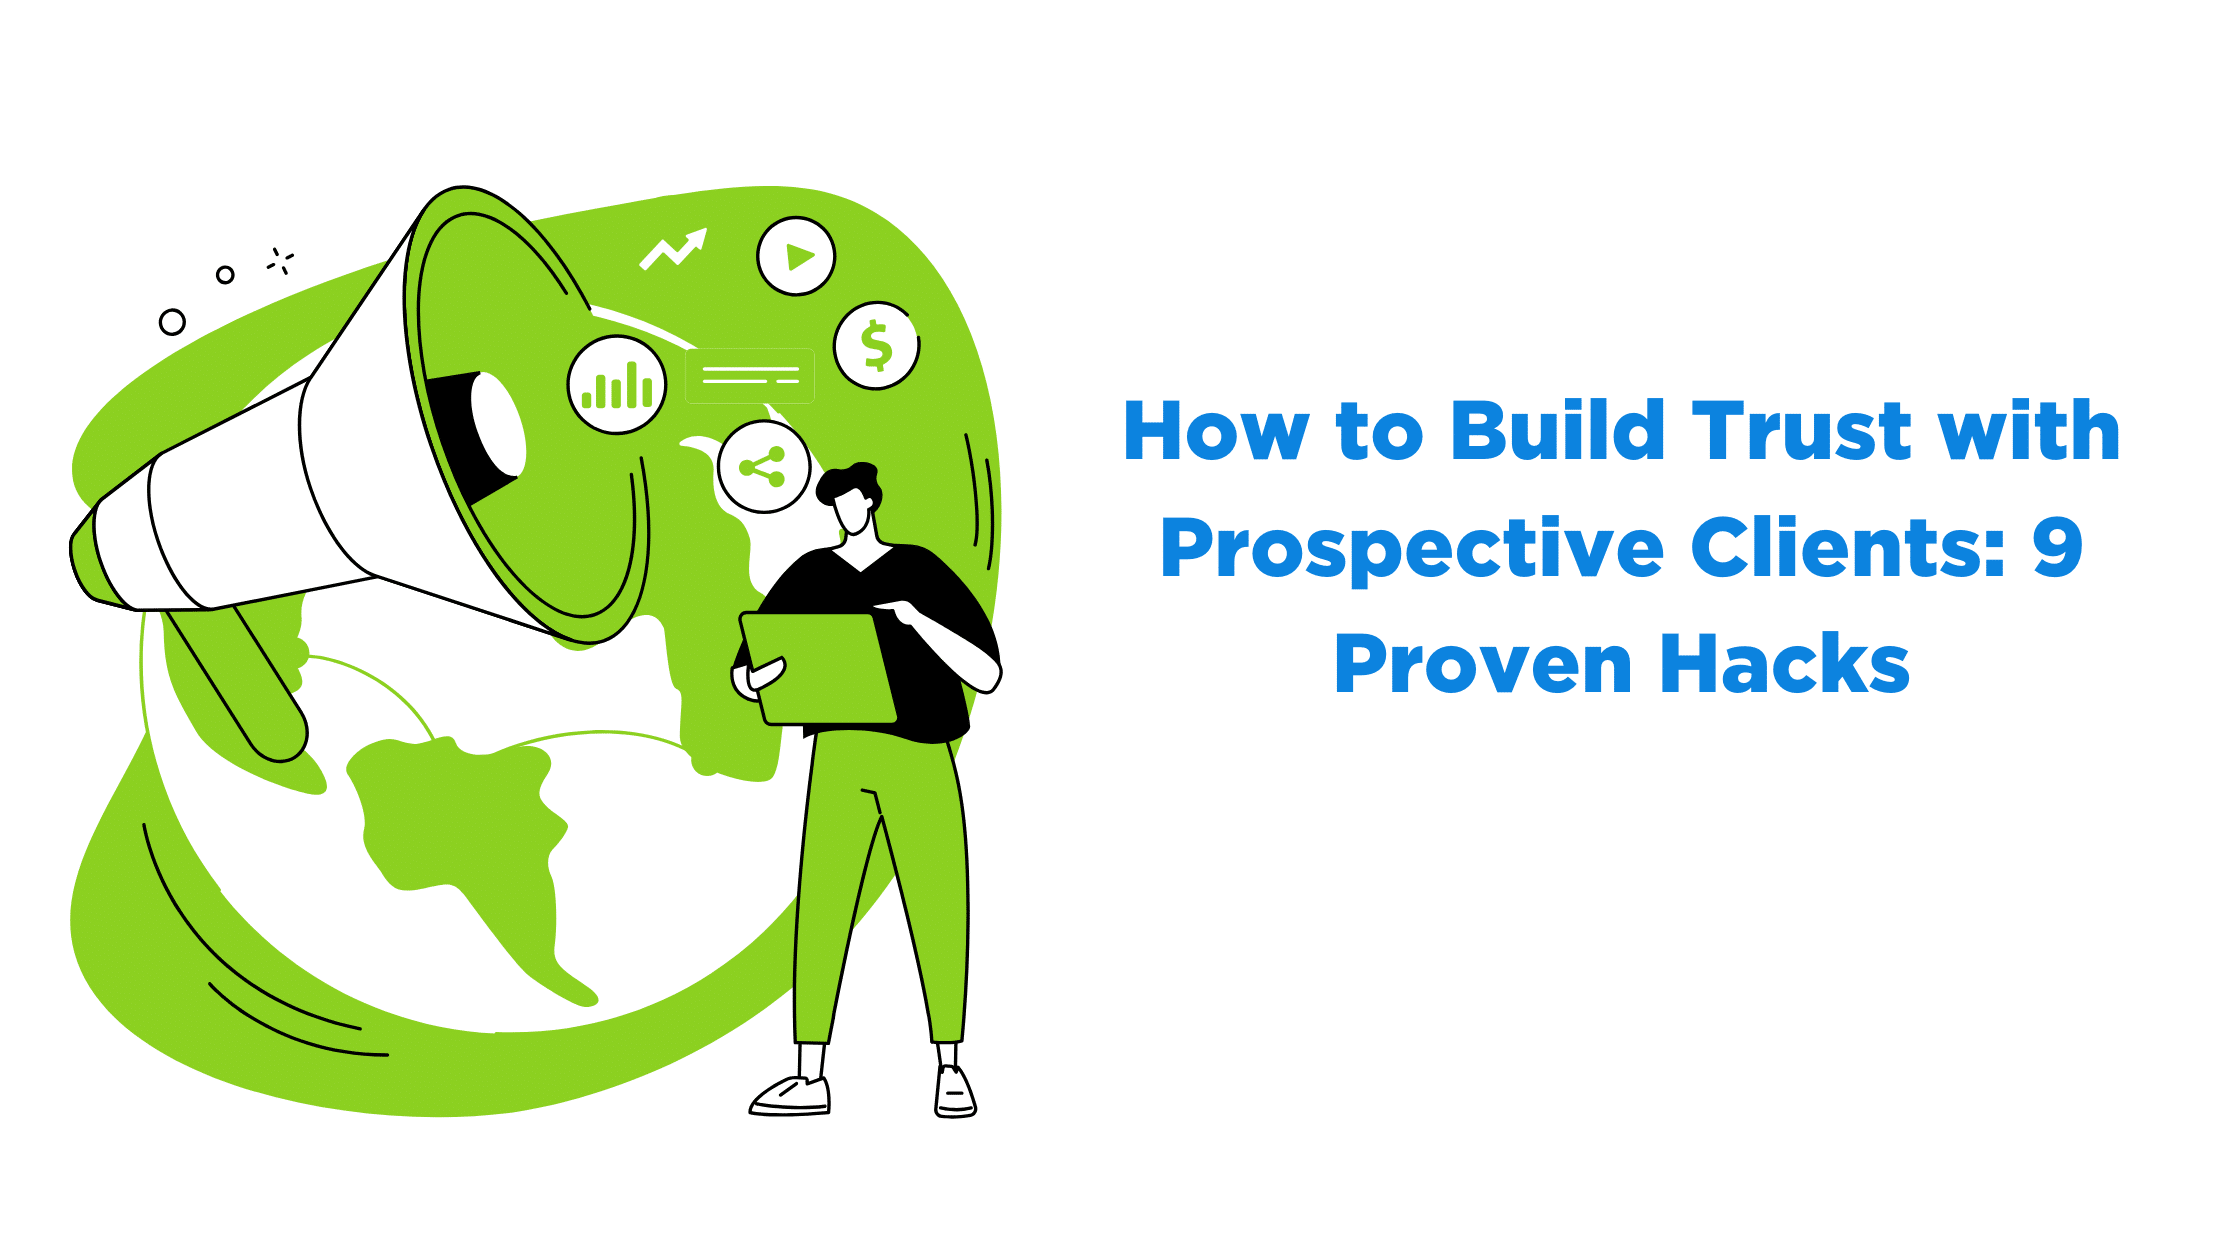 How to Build Trust with Prospective Clients: 9 Proven Hacks